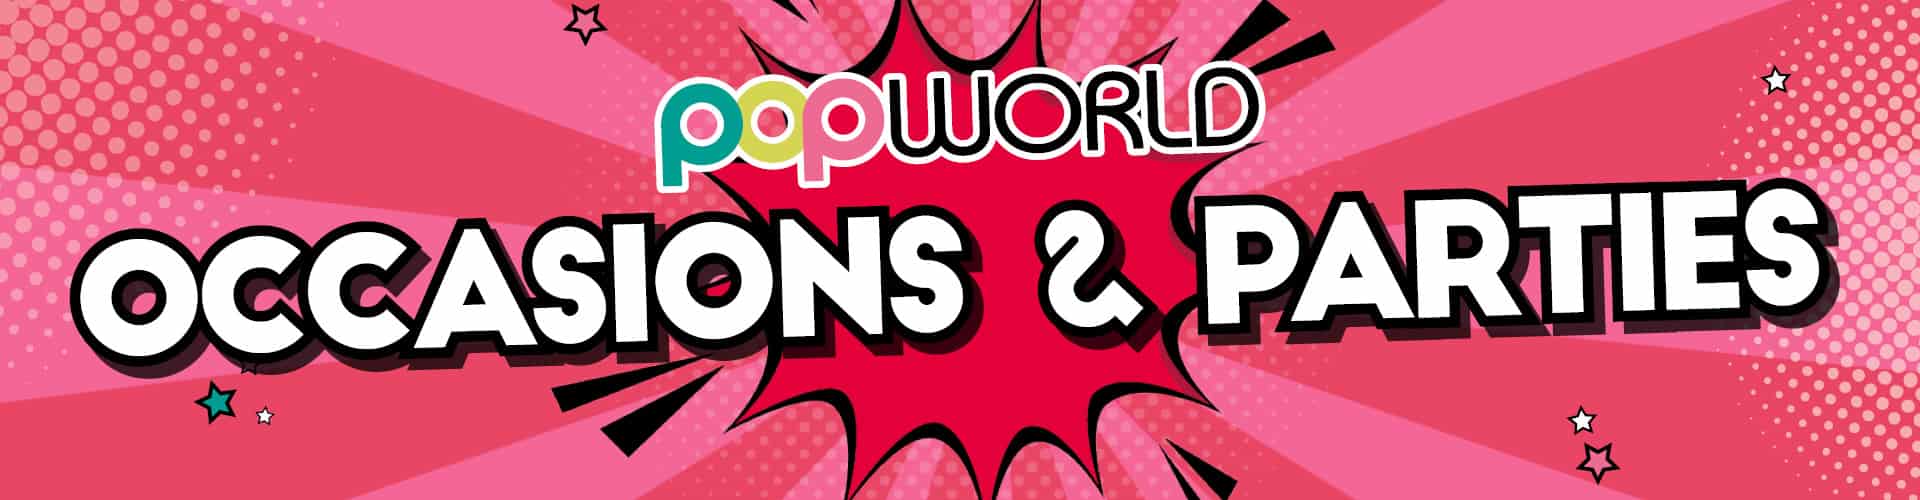 Occasions and Parties at Popworld Southend